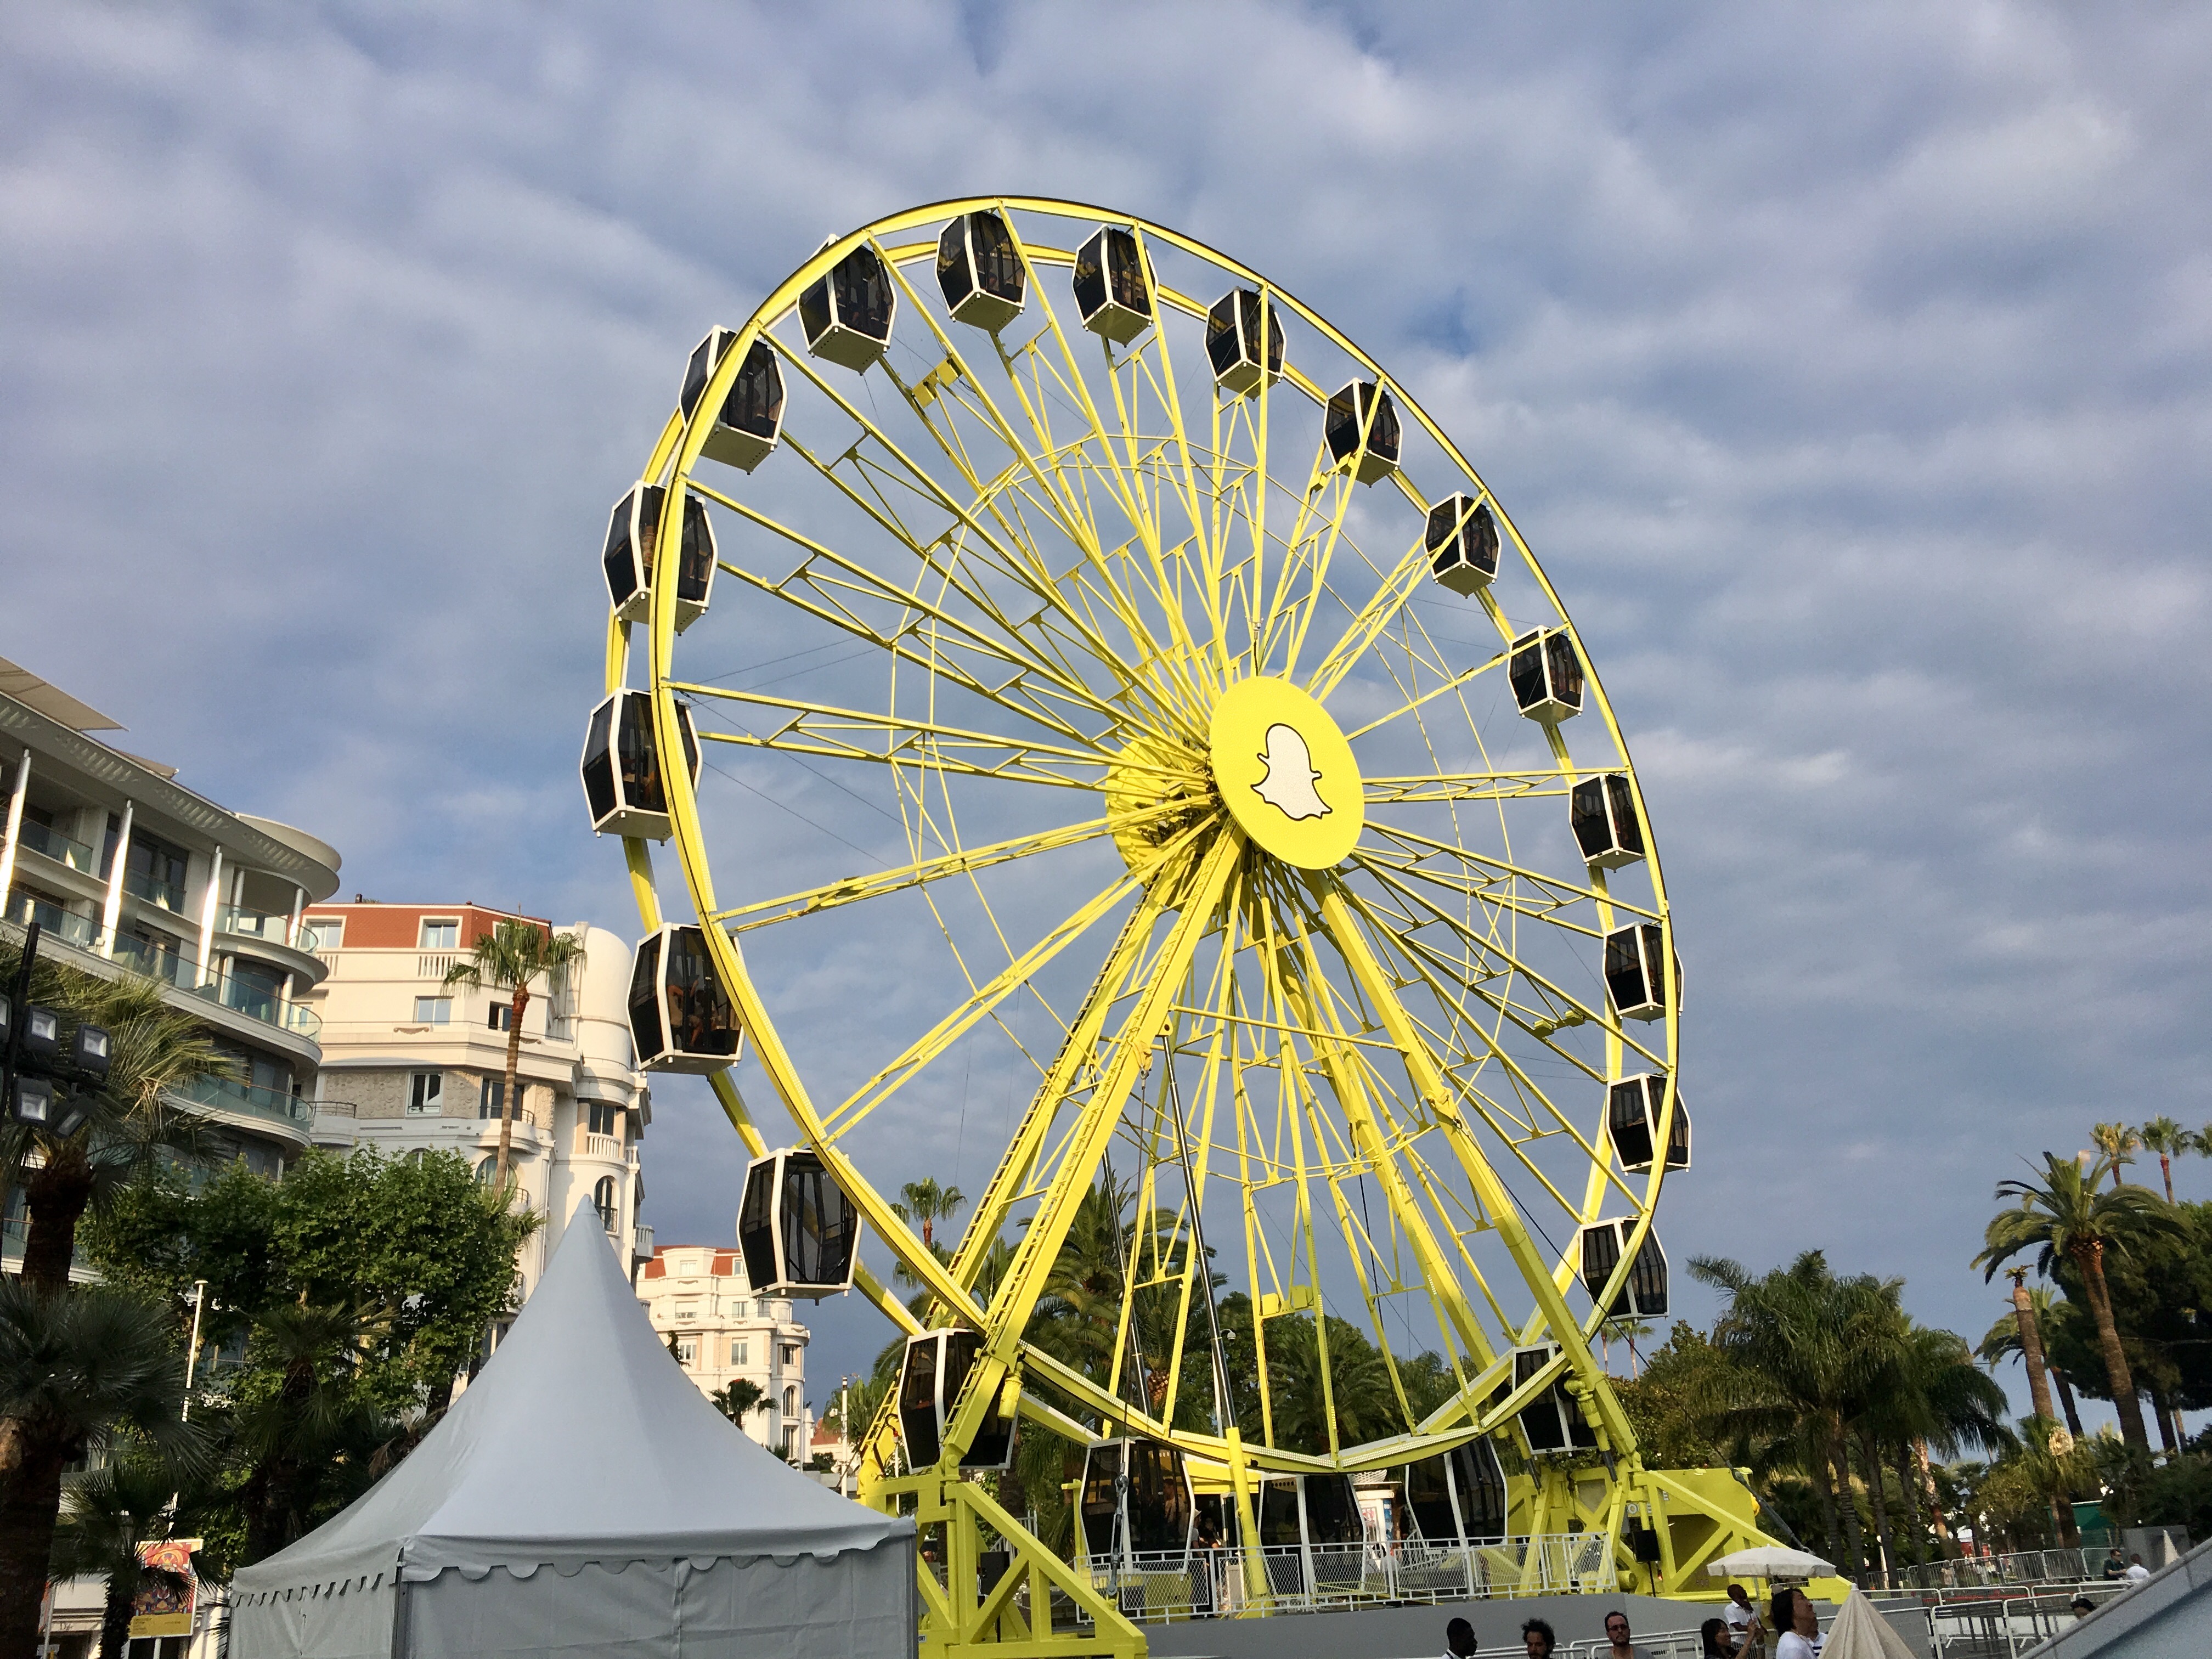 A Snapchat Ferris wheel from Cannes, France.